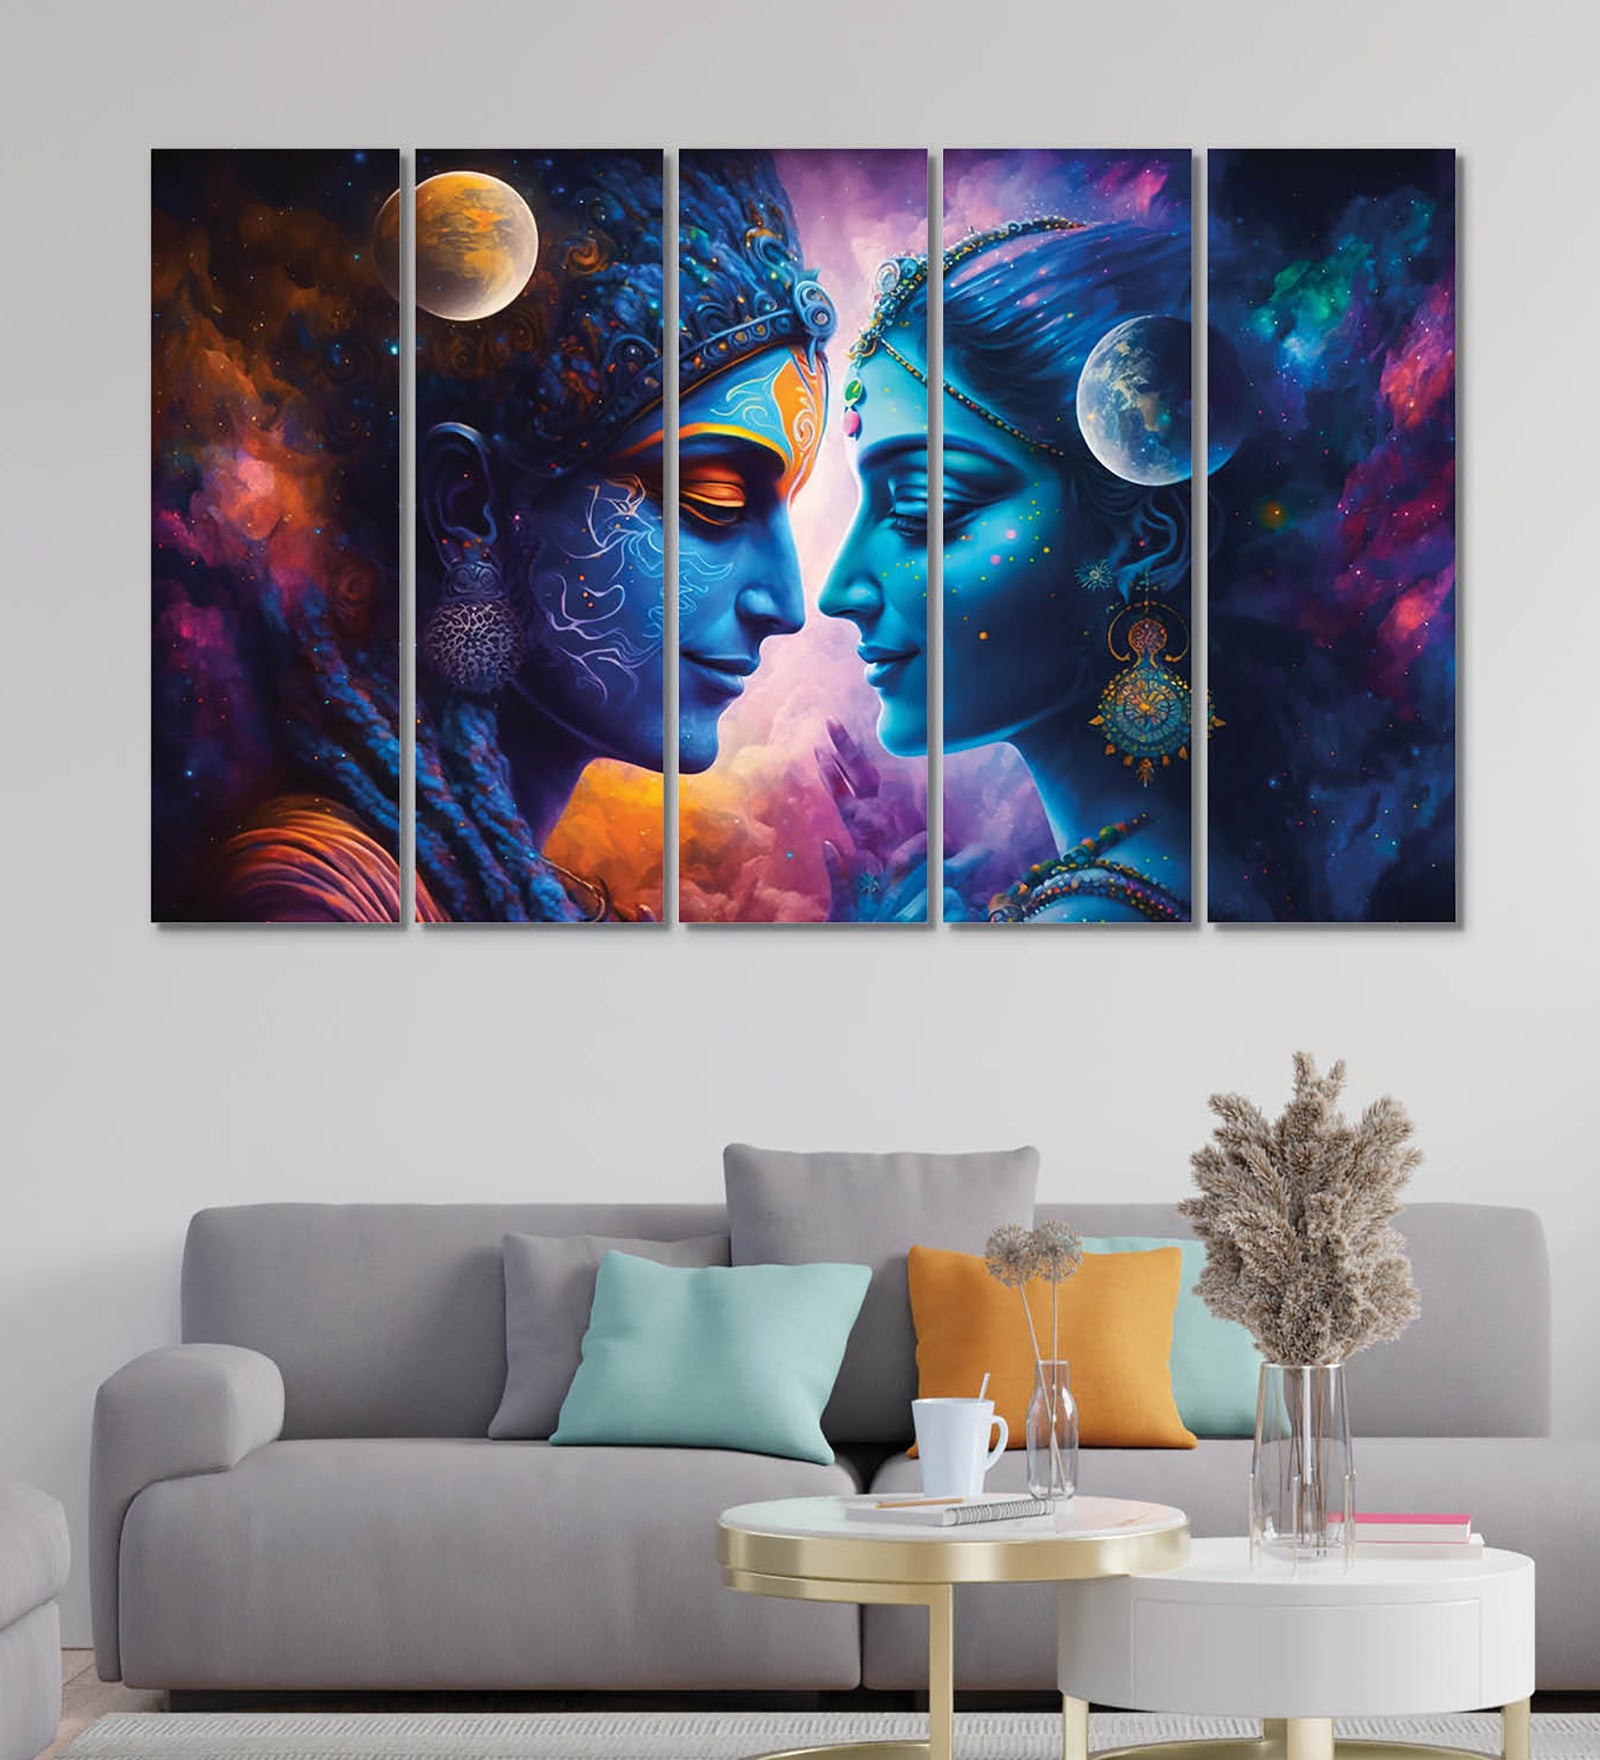 Large Lordess Canvas Painting for Wall Decoration Picture Split Panels Art Decor Set of 5 Canvas Paintings in Living Room Bedroom Hotel Office, Size 16 x 9.6 inches, 5 Frames